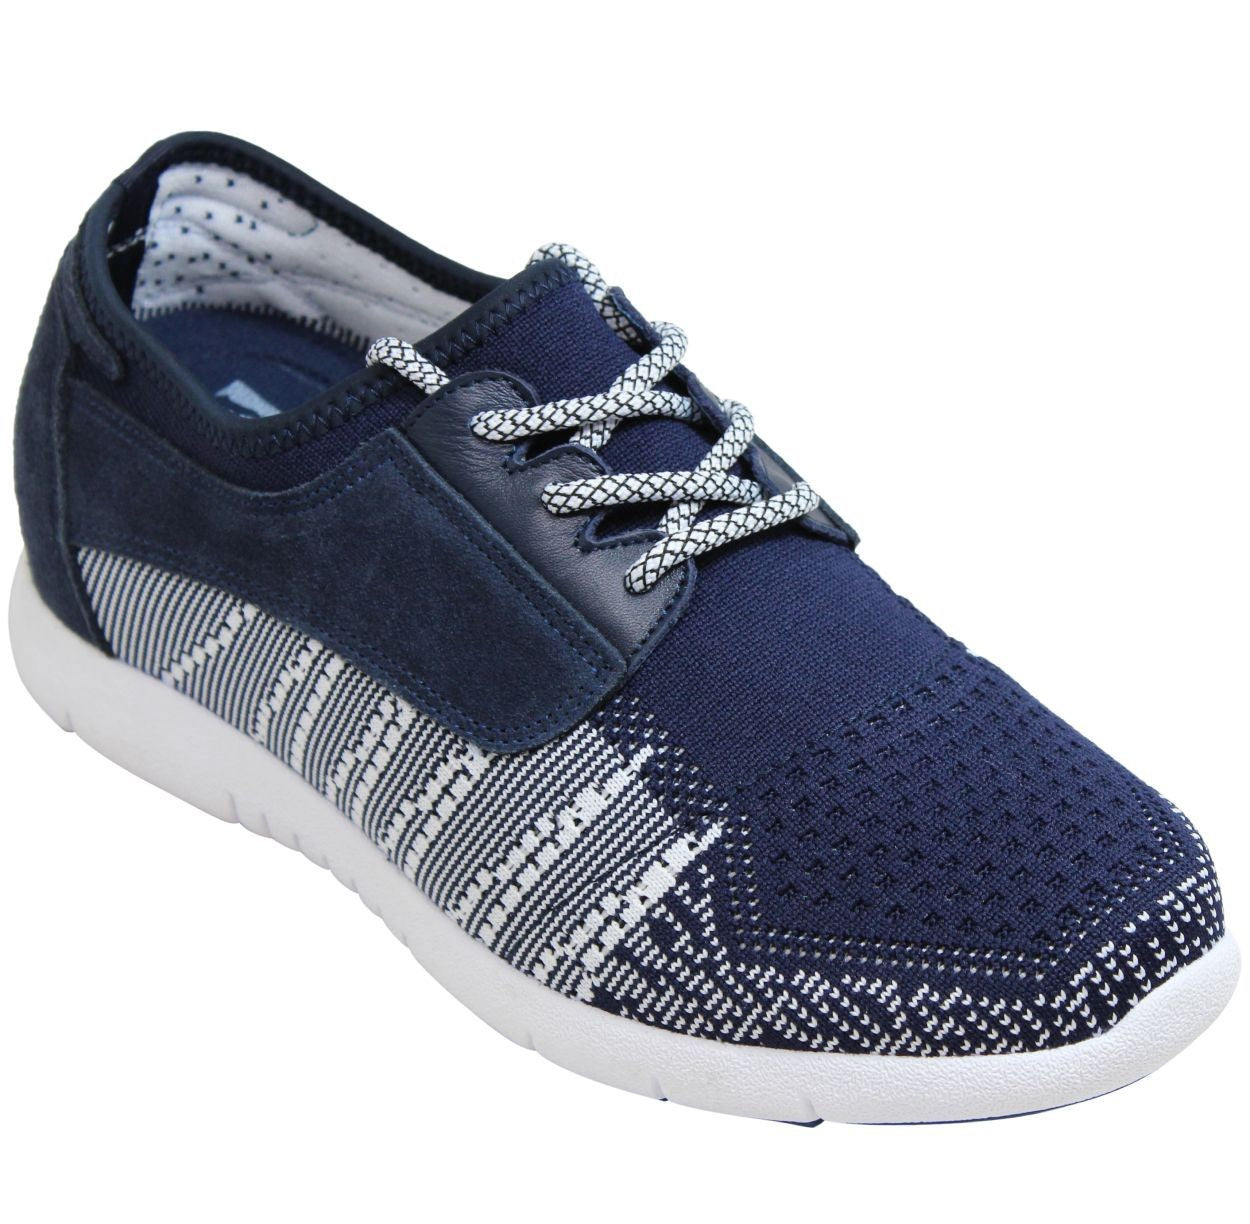 Elevator shoes height increase TOTO - D62107 - 2.8 Inches Taller (Navy Blue/Aqua) - Super Lightweight